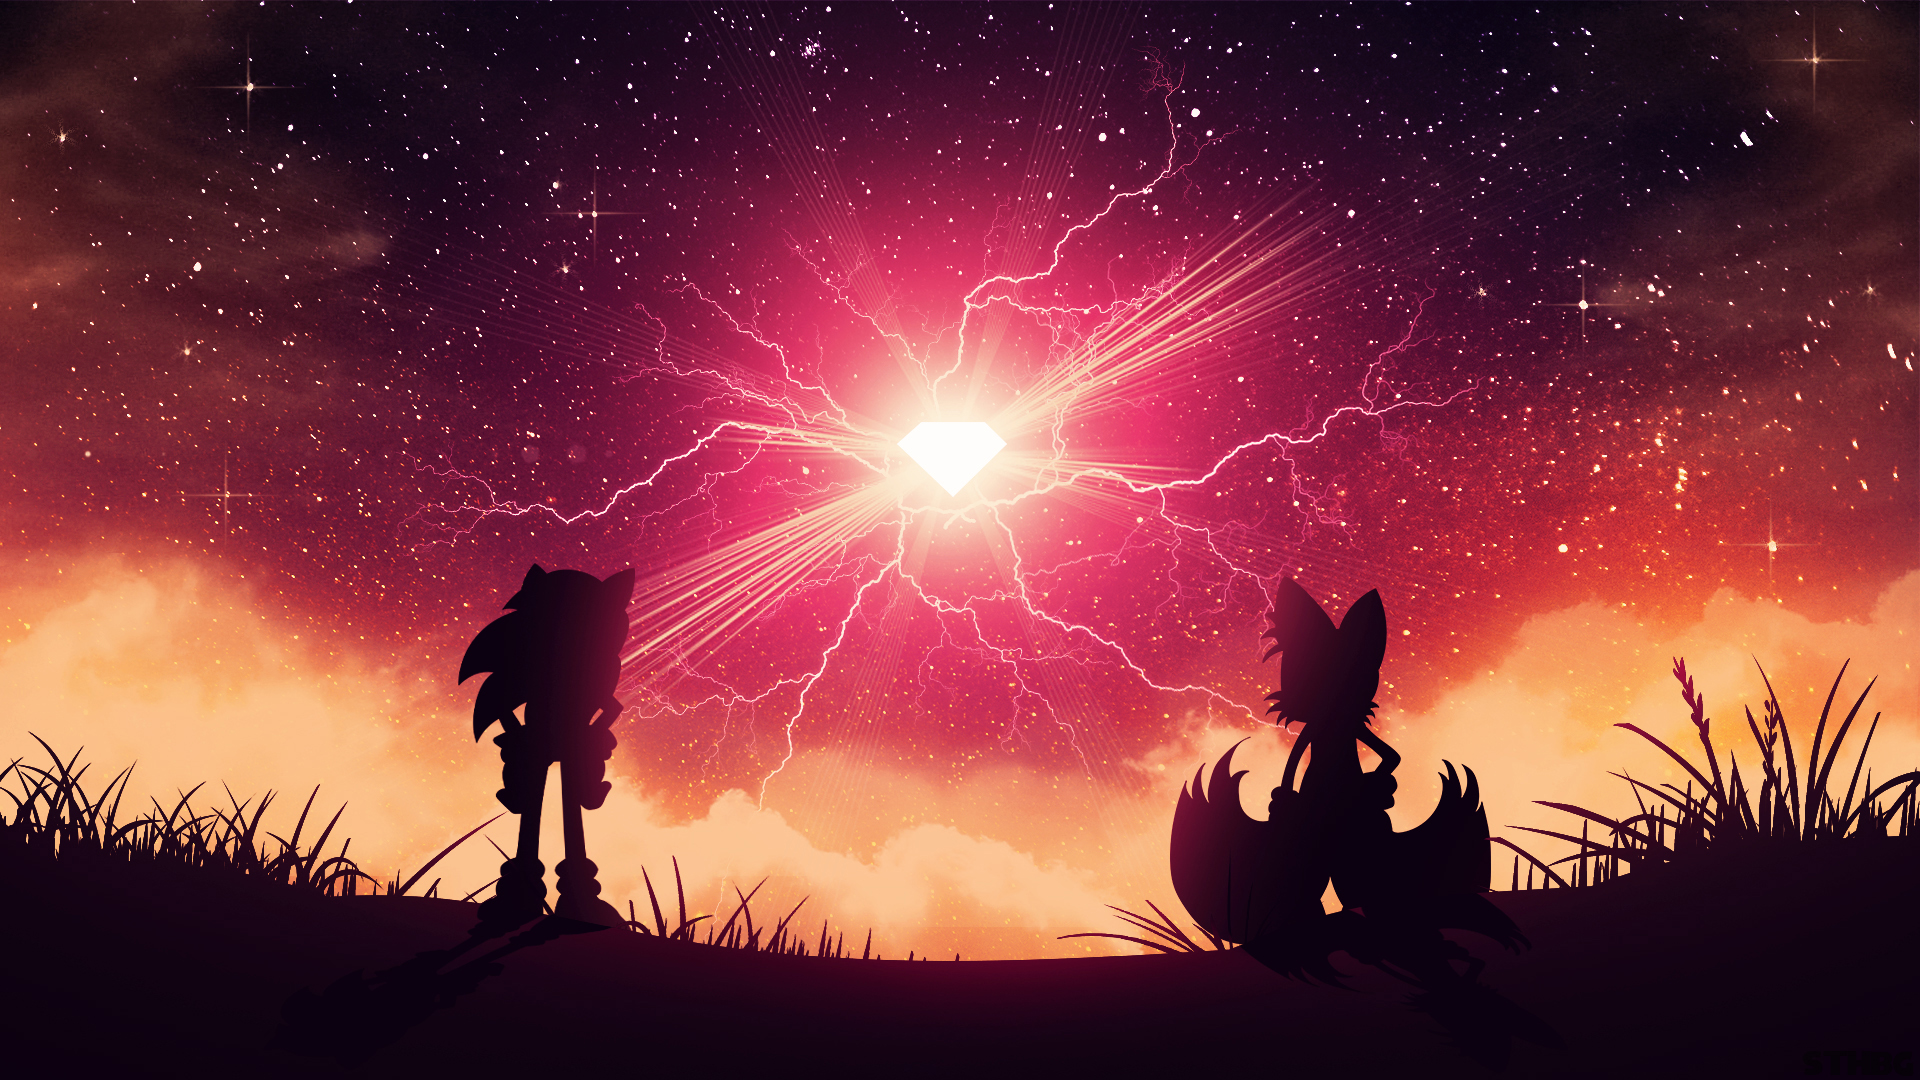 Tails (character), Sonic the Hedgehog, Sonic, Video games, Sega Wallpaper